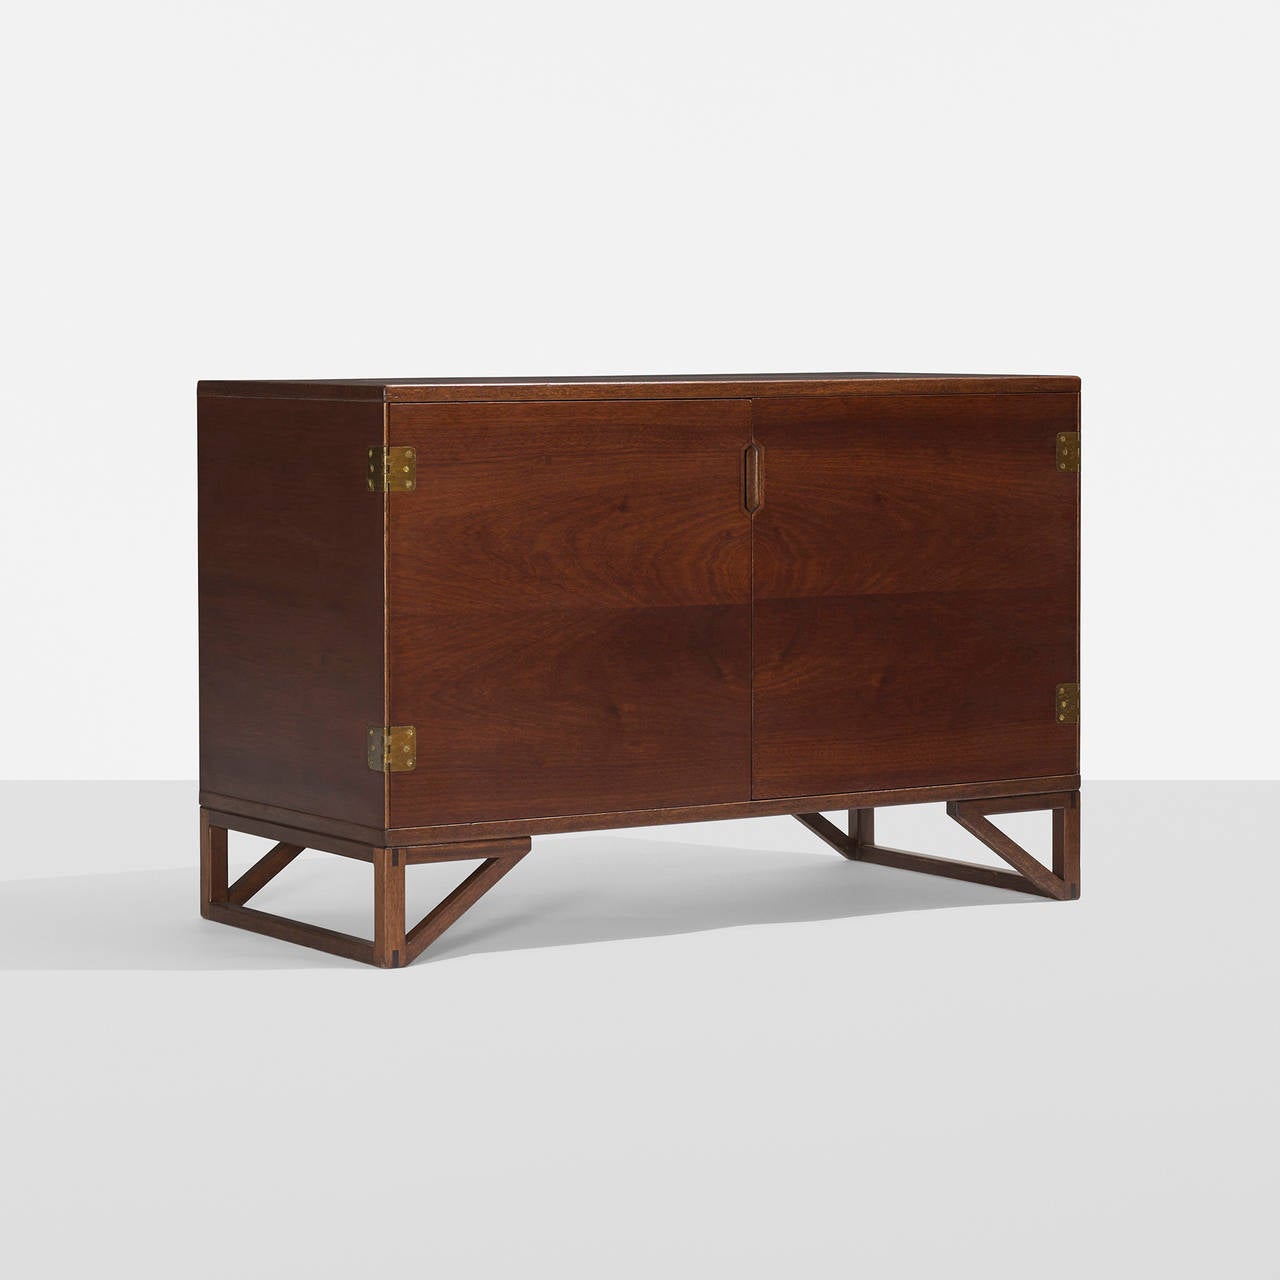 Cabinet features two doors concealing two adjustable shelves and three drawers.